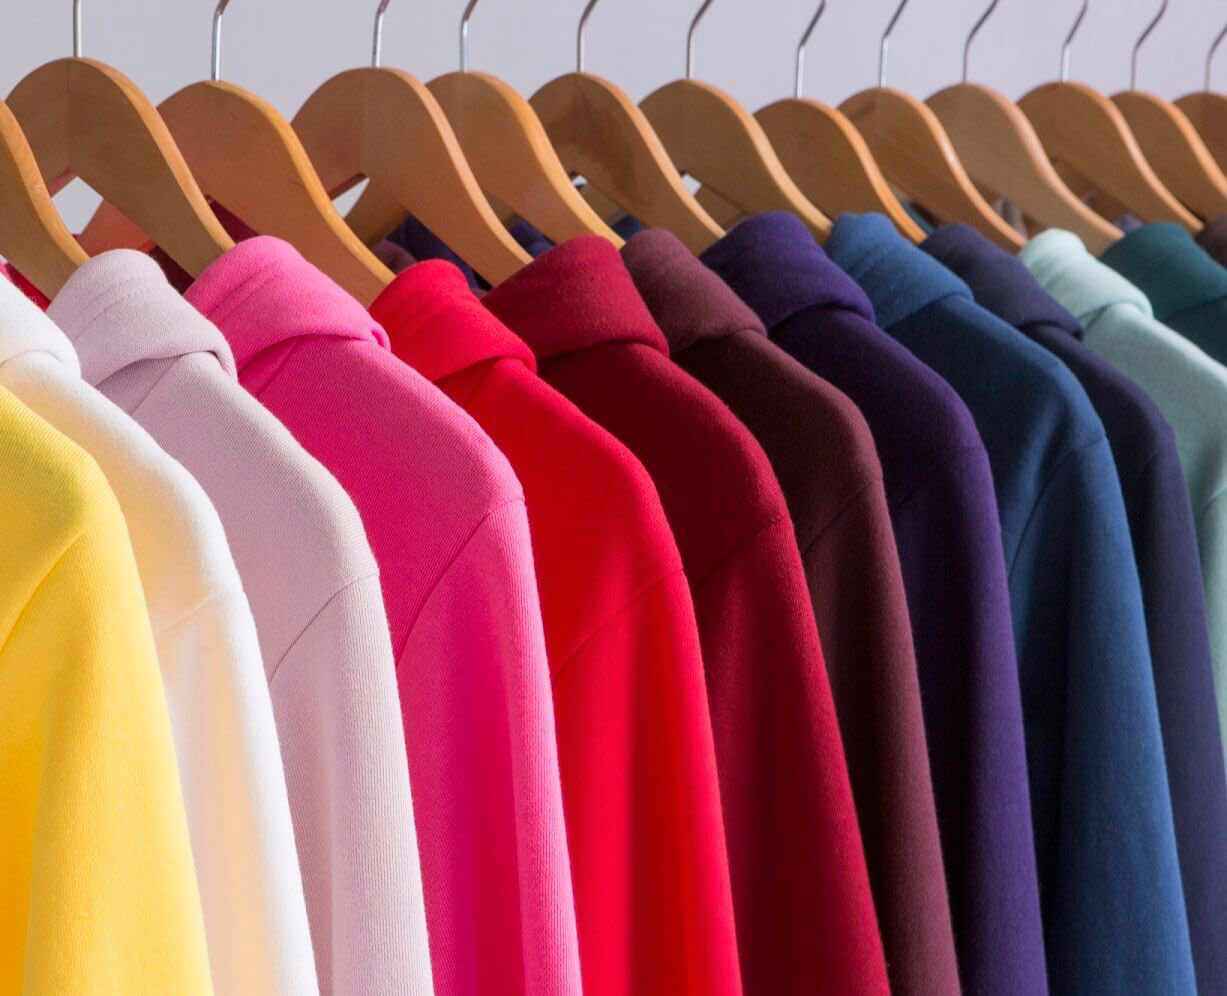 Vibrantly colored American Apparel™ sweaters are hung up on a rack.